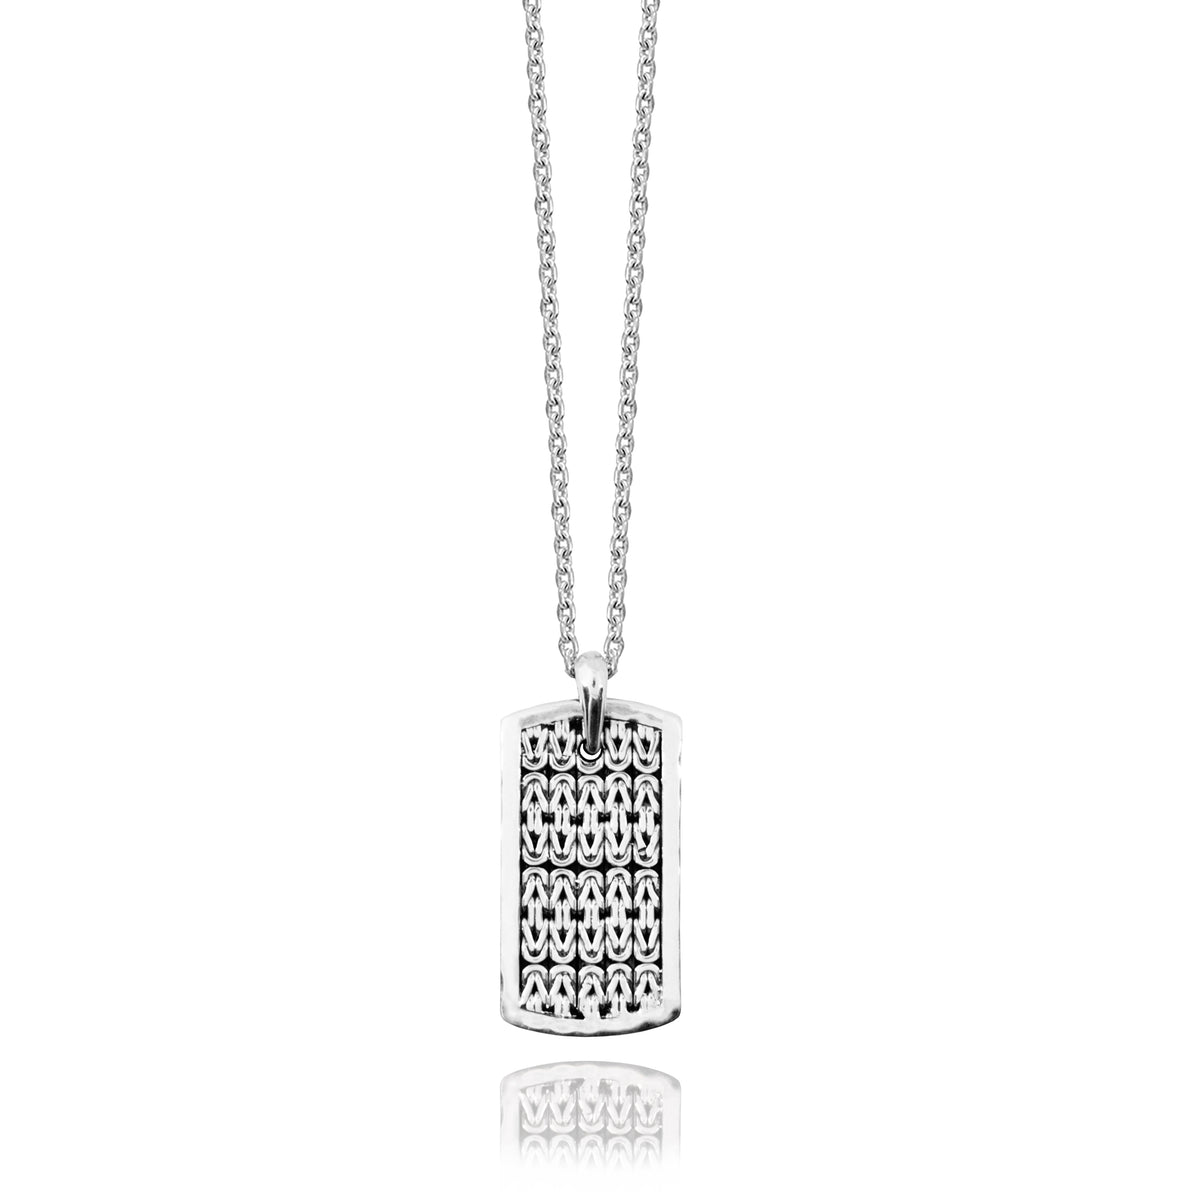 Classic Box Weave and Hammered Border Pendant Necklace. 31mm x 17mm Pendant